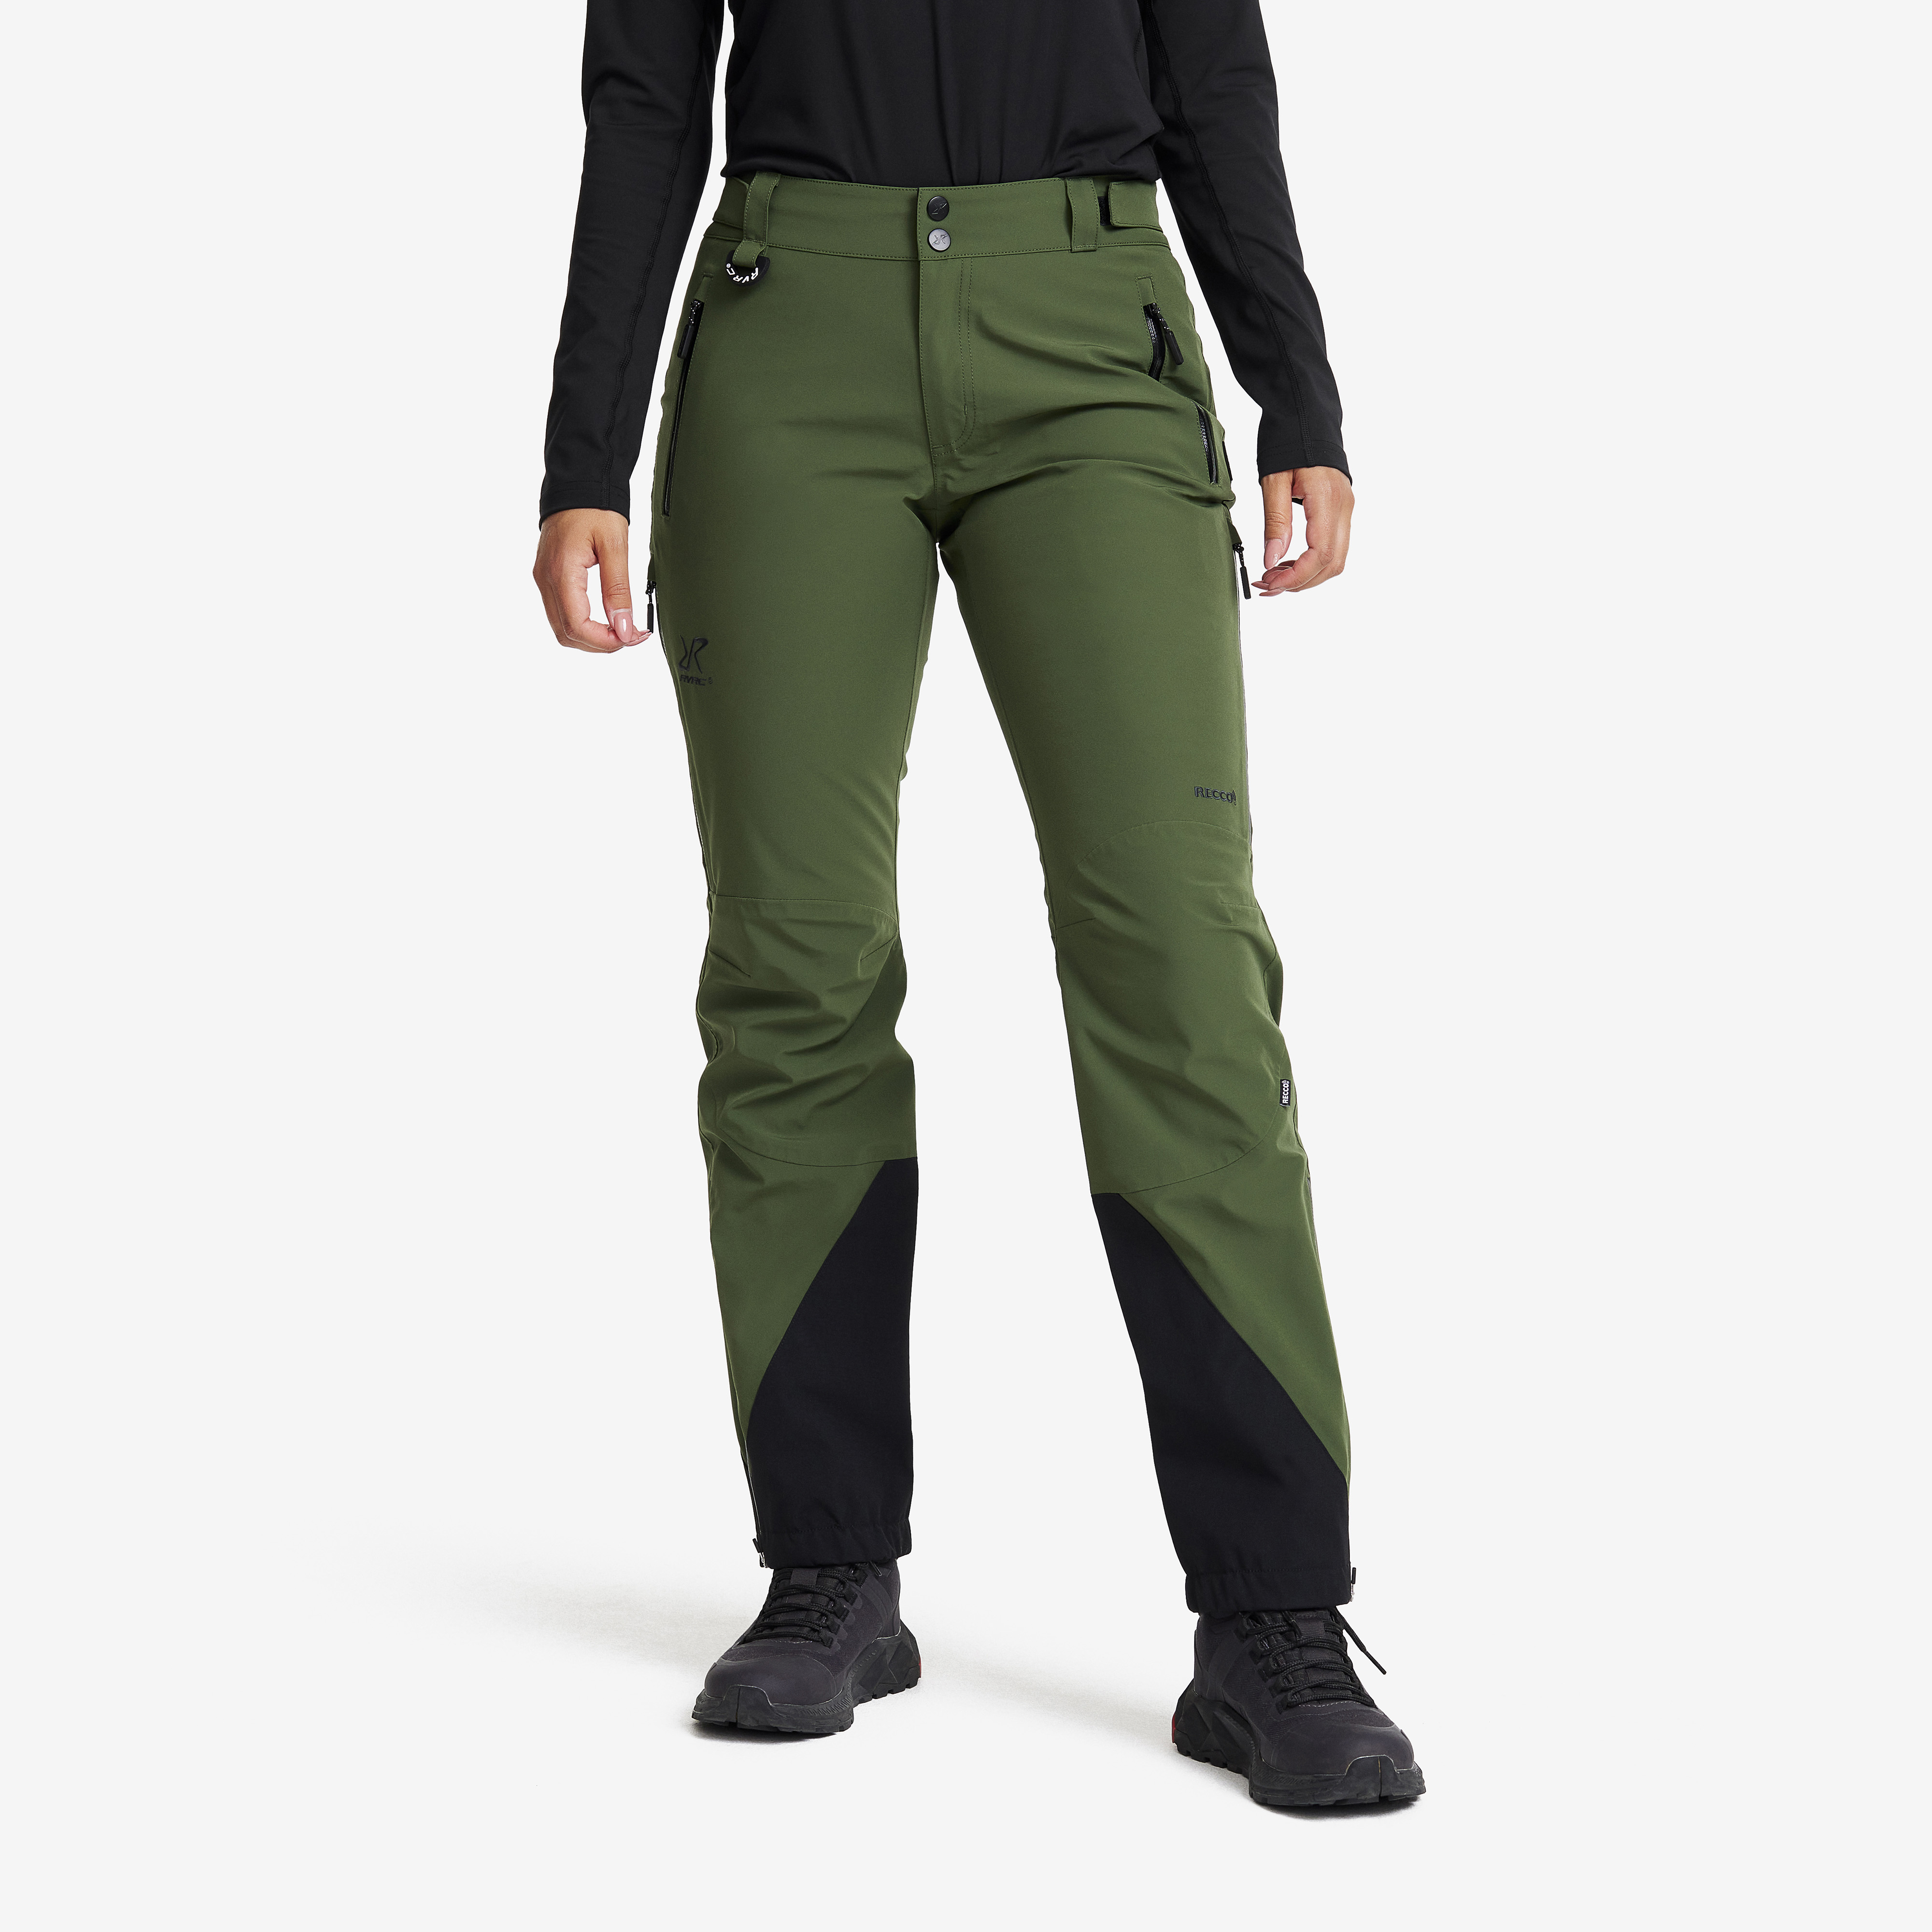 Cyclone Rescue Pants Black Forest Naistele